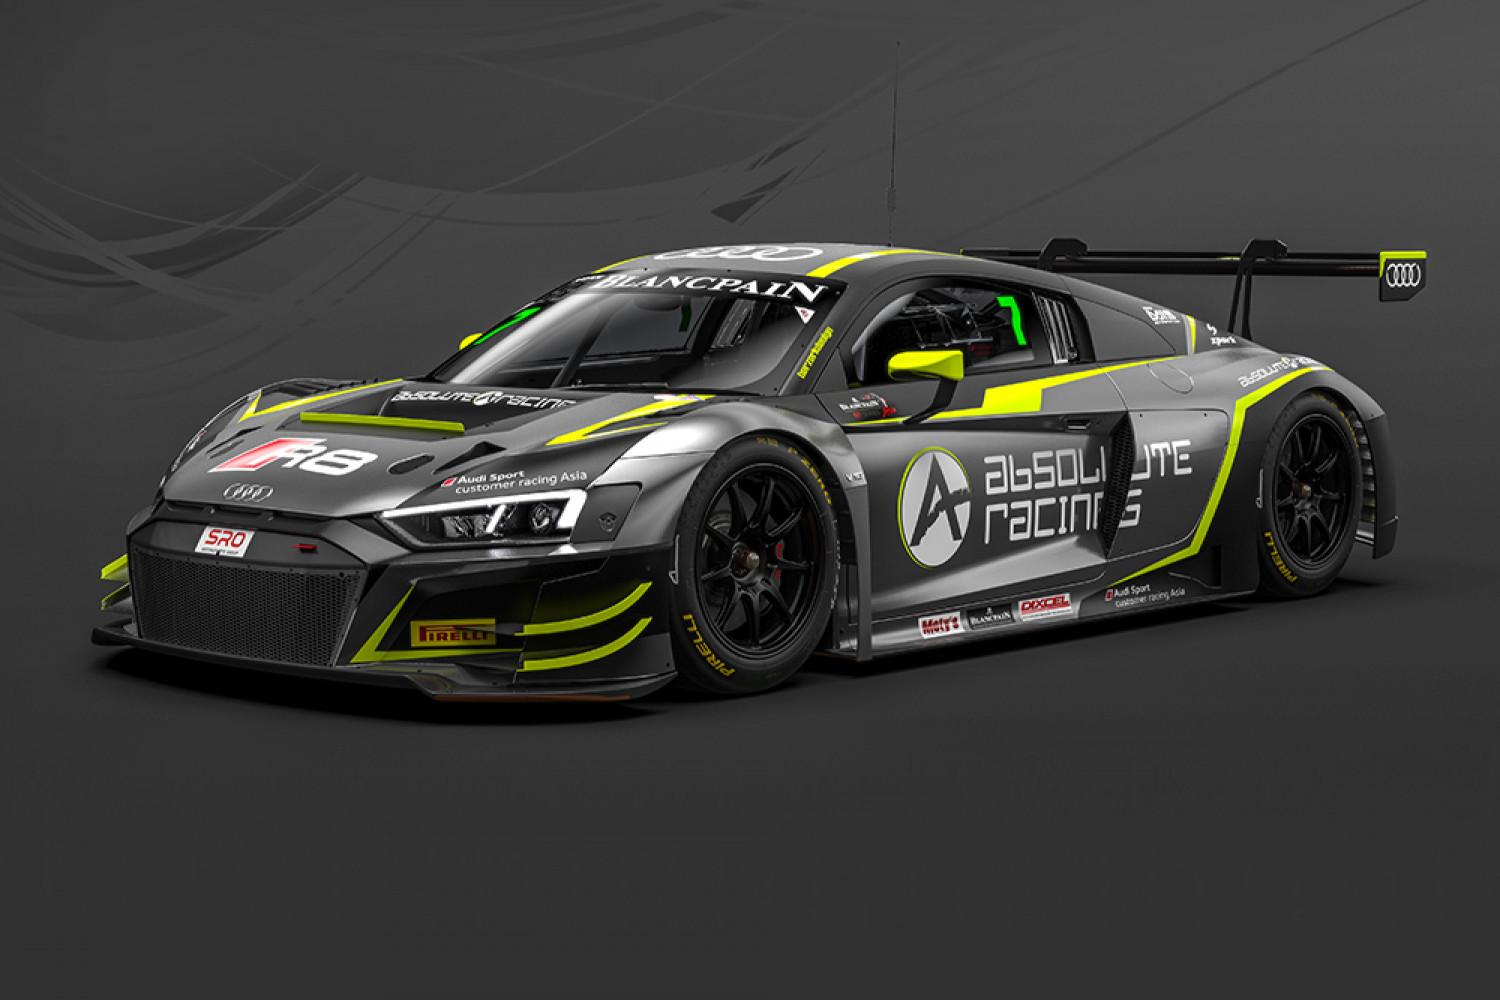 Absolute Racing Return With Two New For 2019 Audi R8 LMS GT3